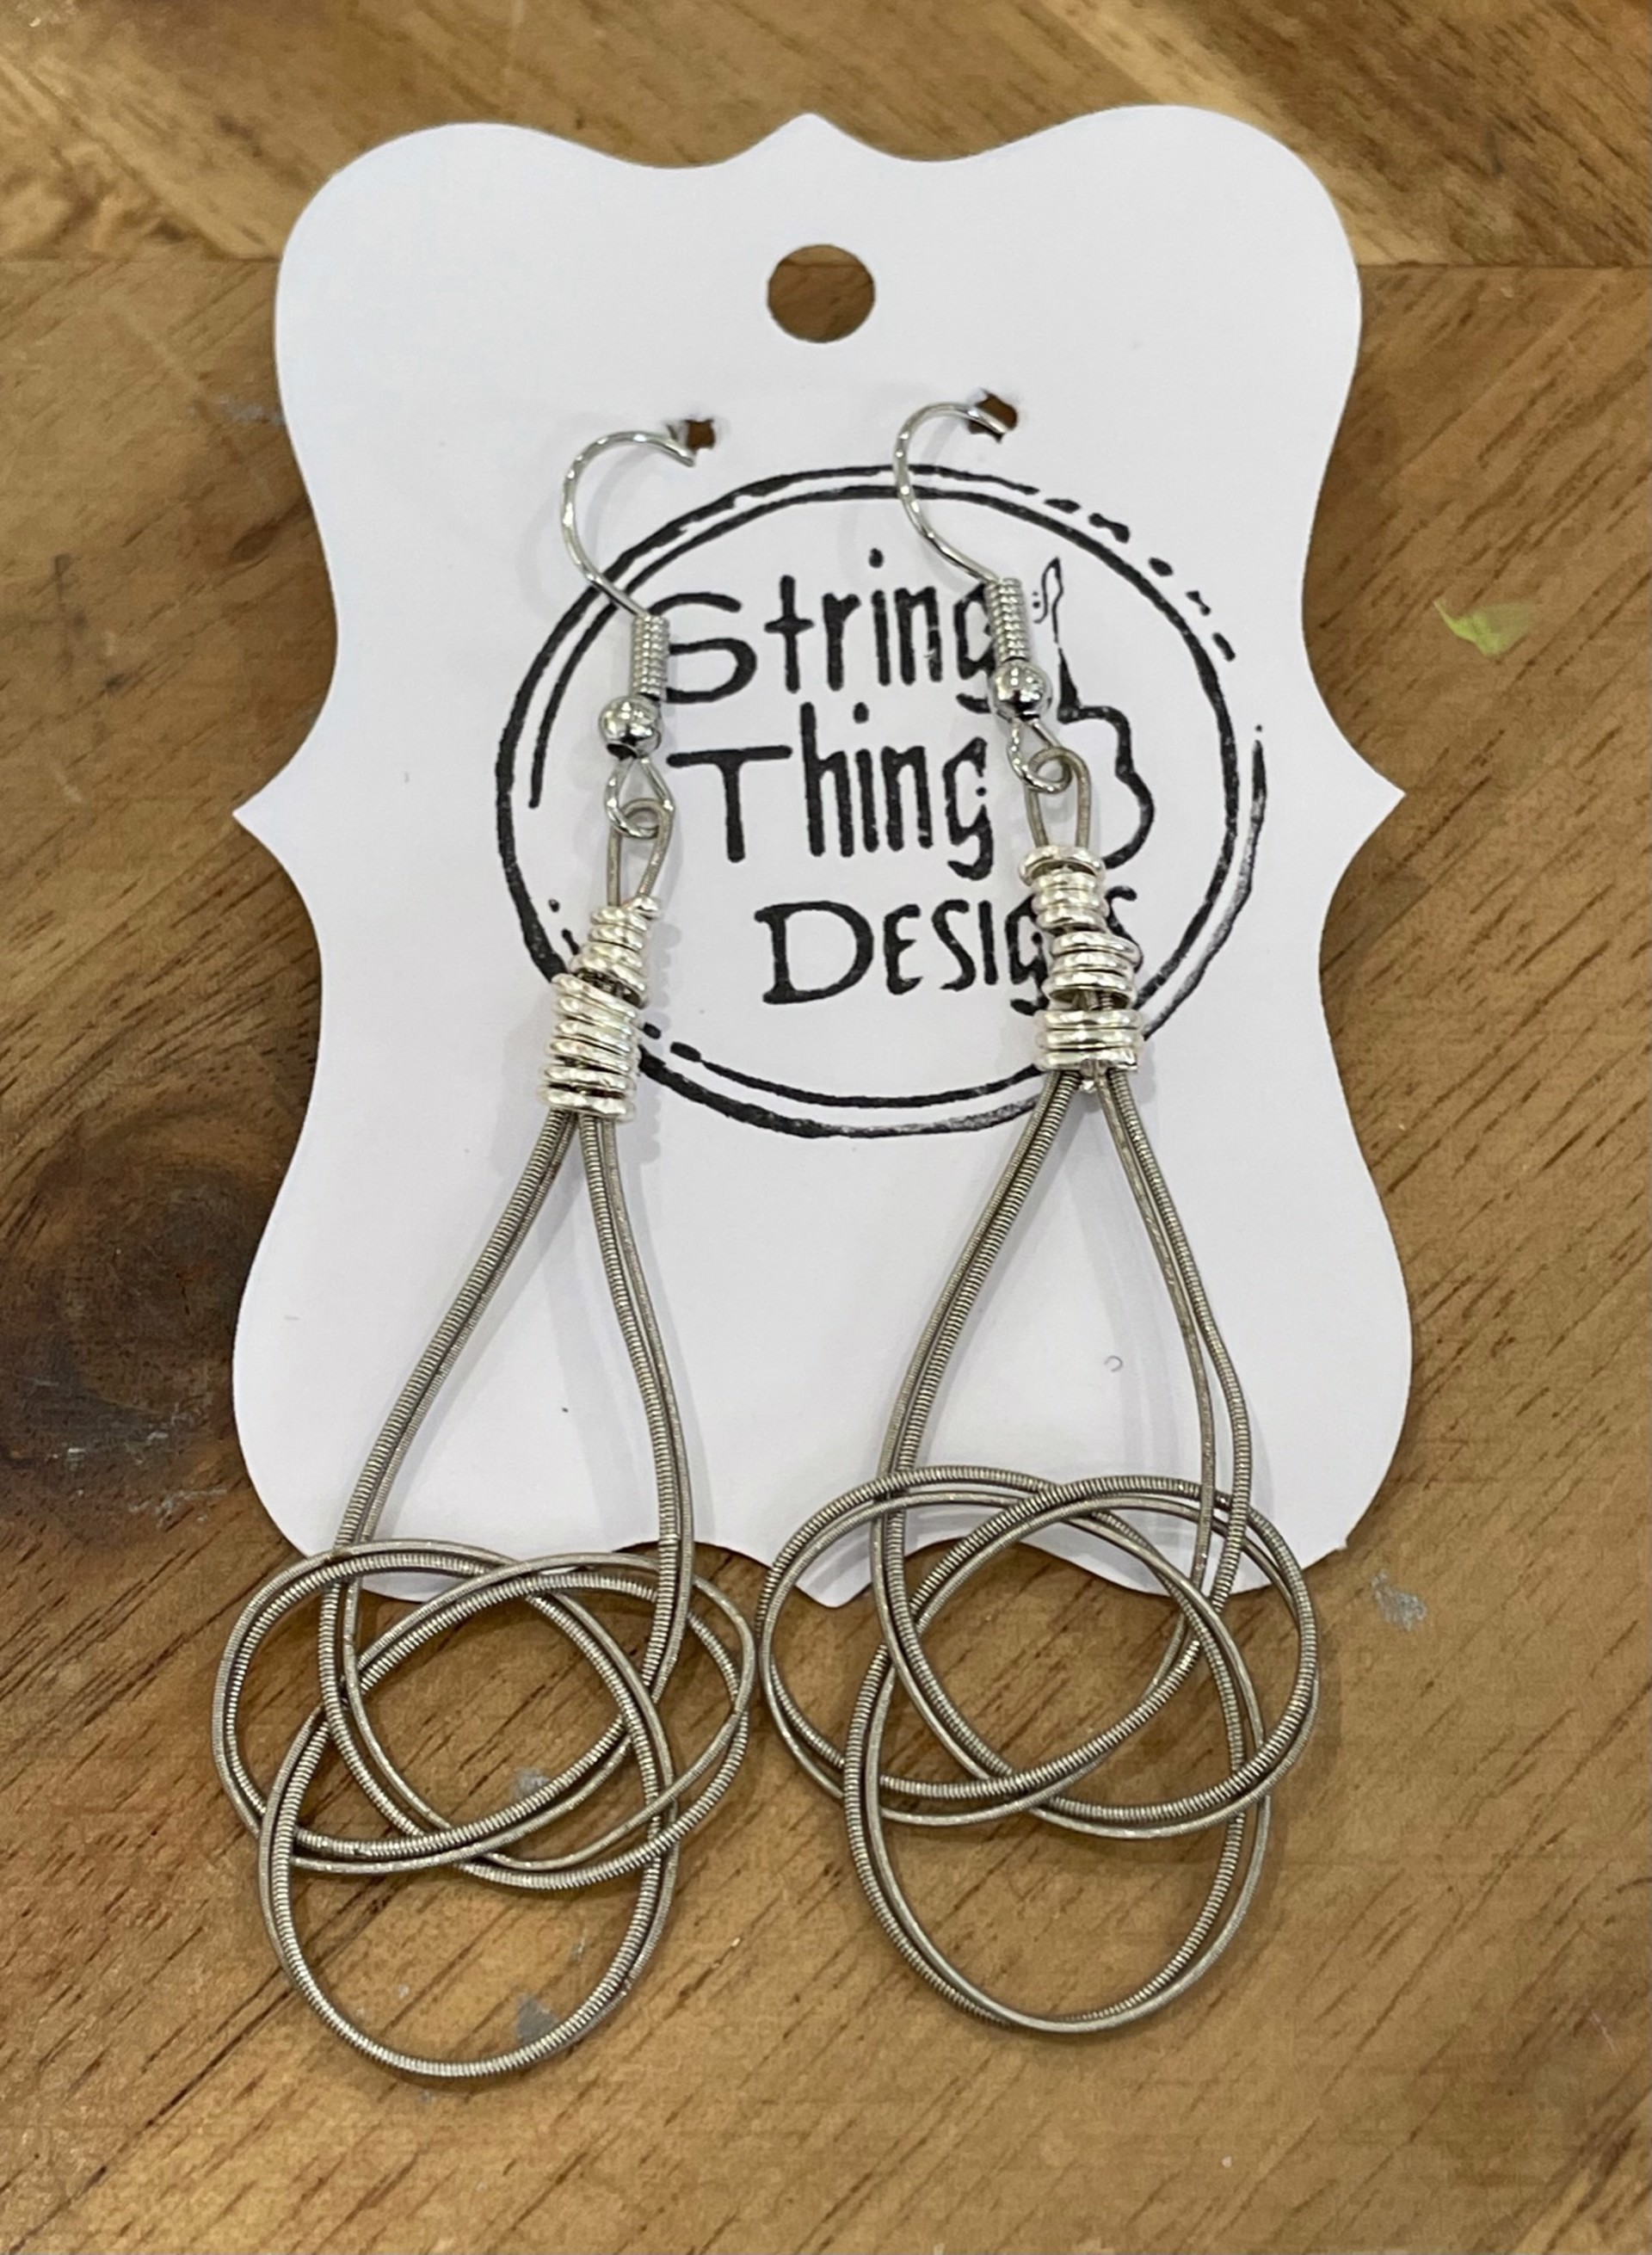 Knot Guiltar String Earrings by String Thing Designs